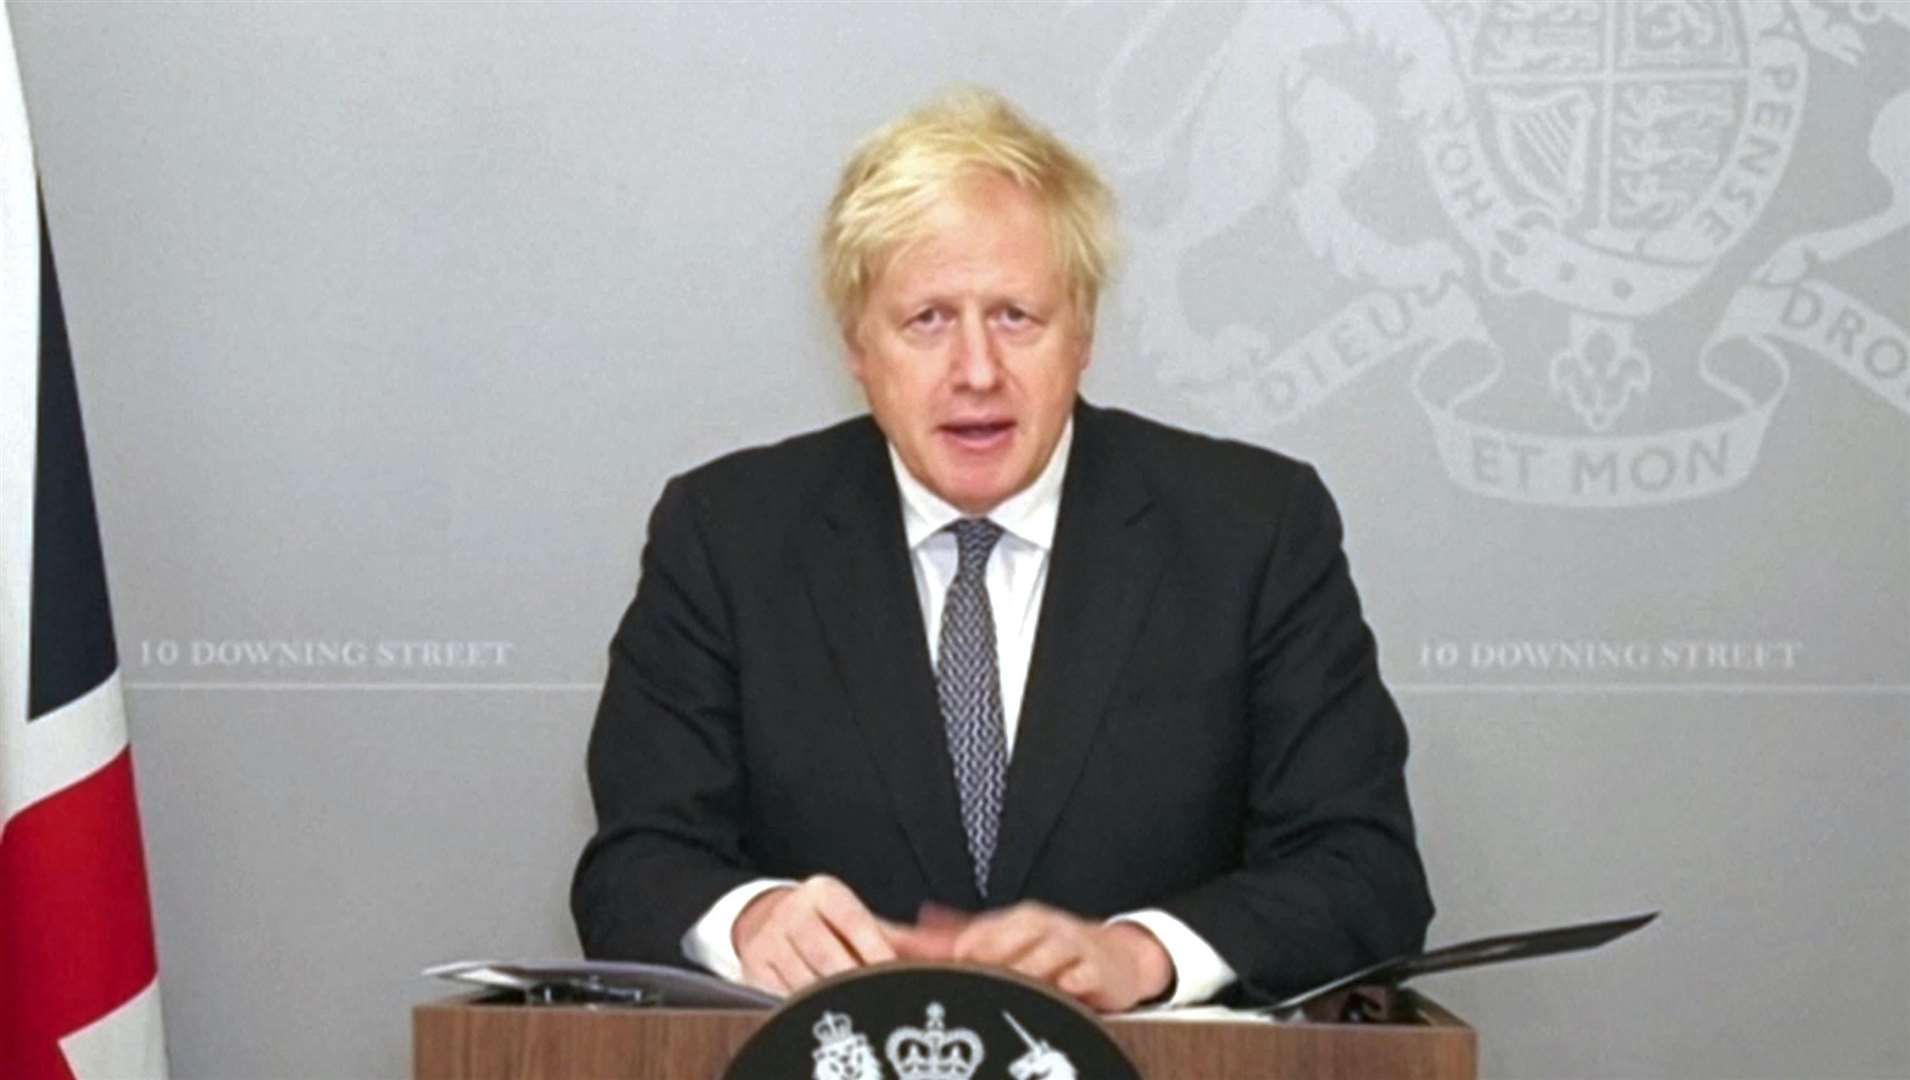 Boris Johnson 'cancelled Christmas' as Covid cases soared in 2020